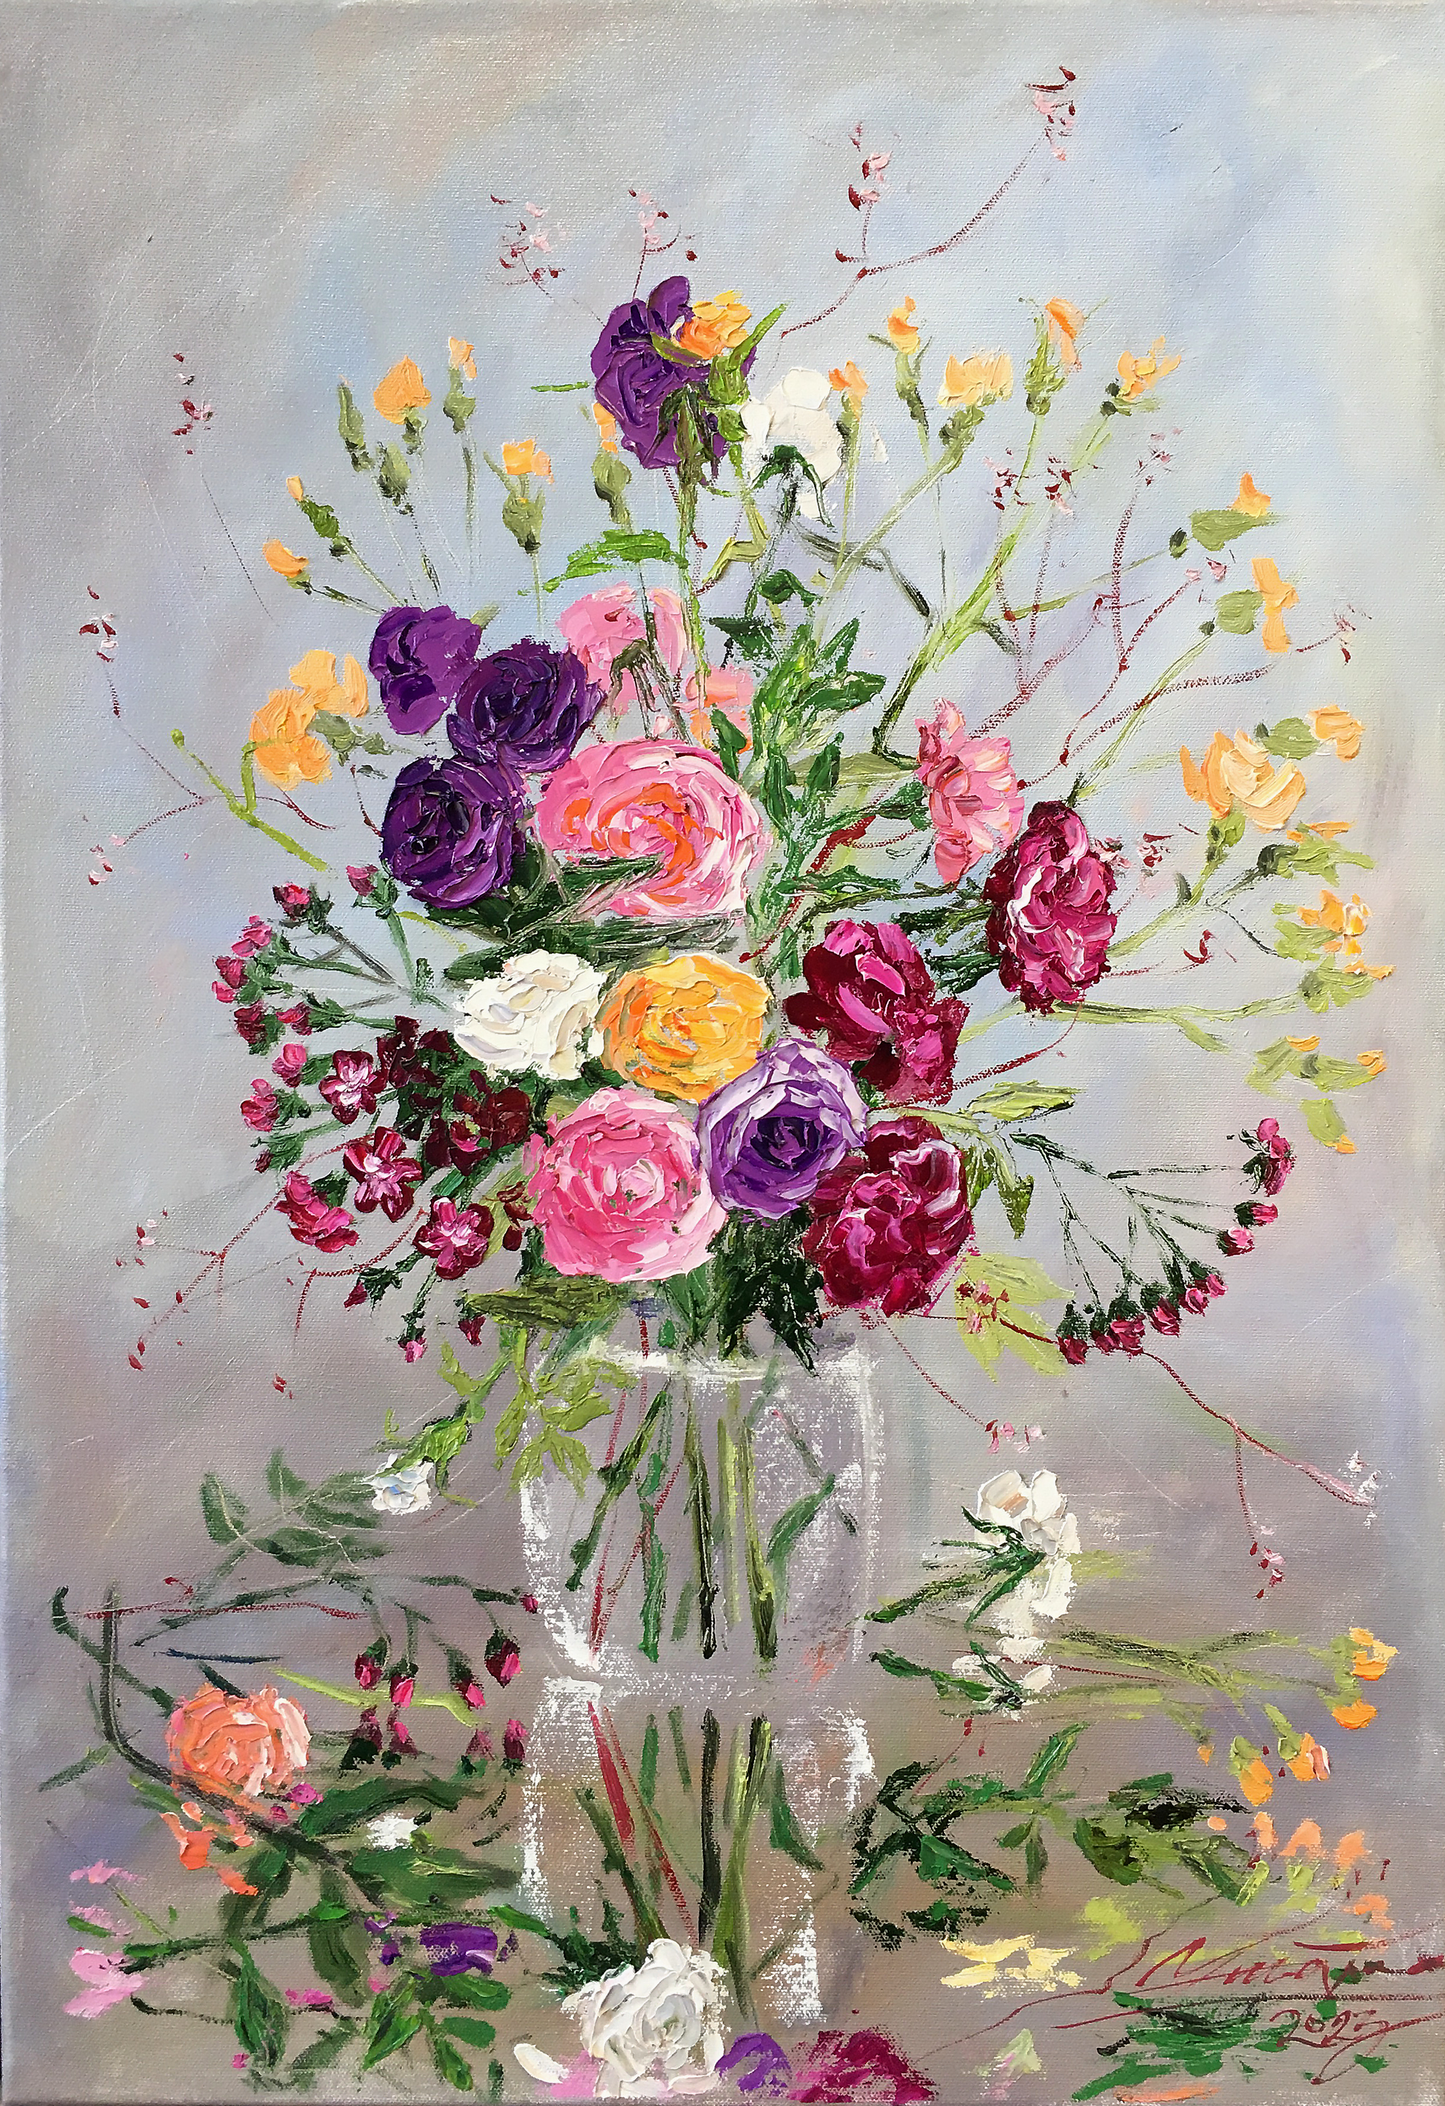 Autumn roses by order / 66x46cm / Oil, canvas